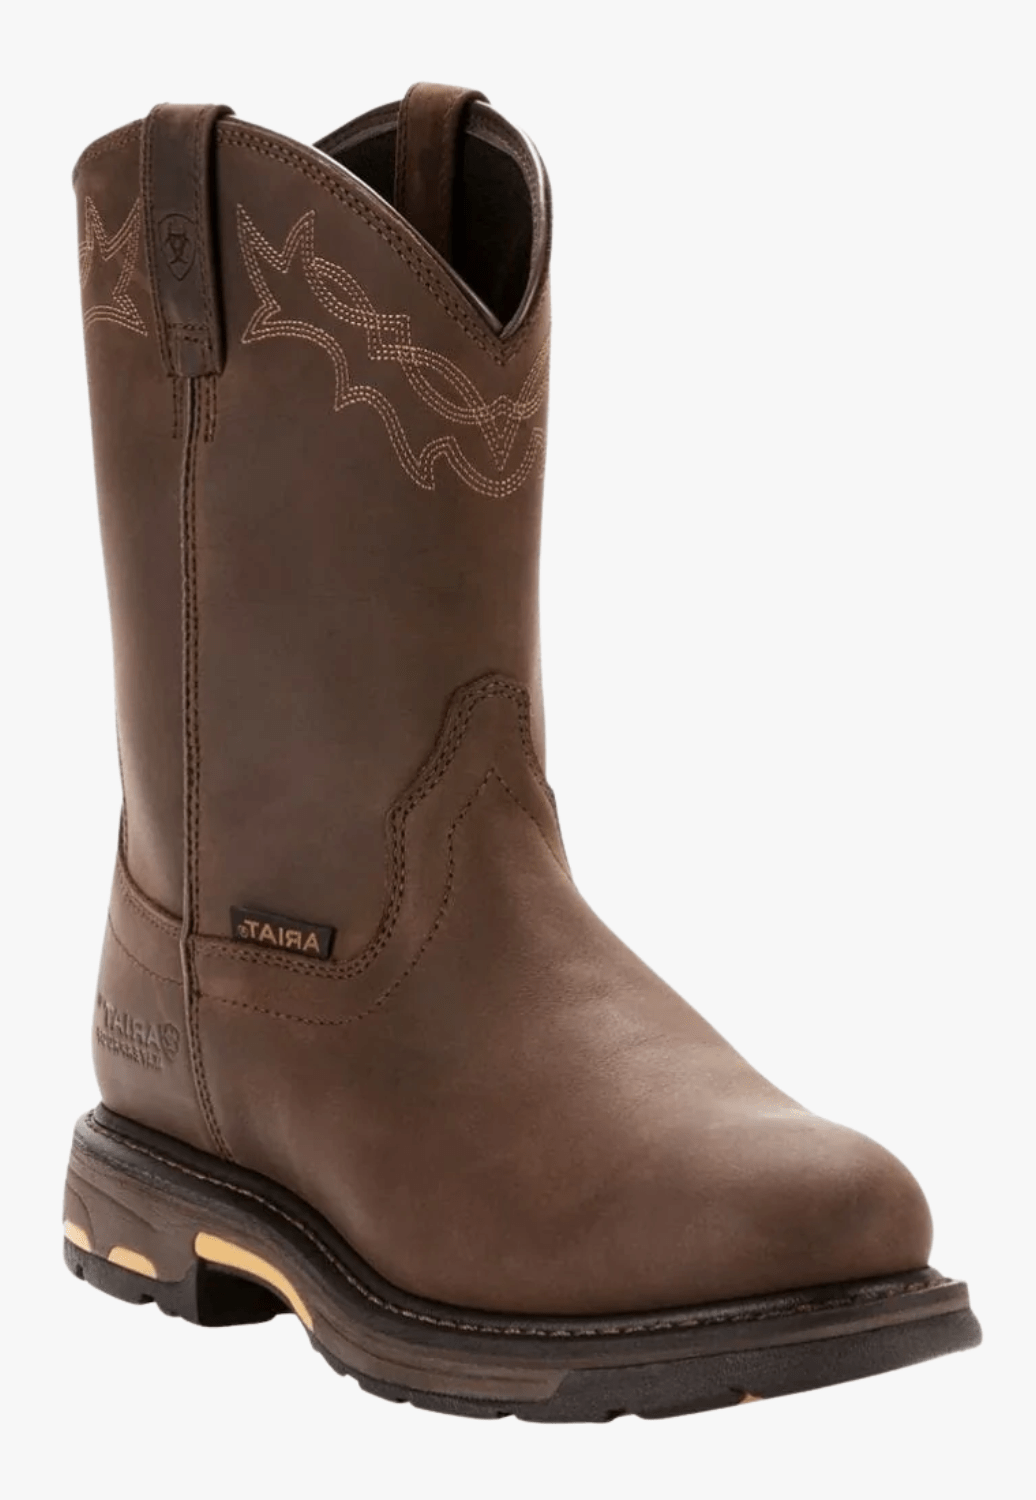 Ariat WORKWEAR - Boots Non Safety Ariat Mens Workhog Pull On Boot